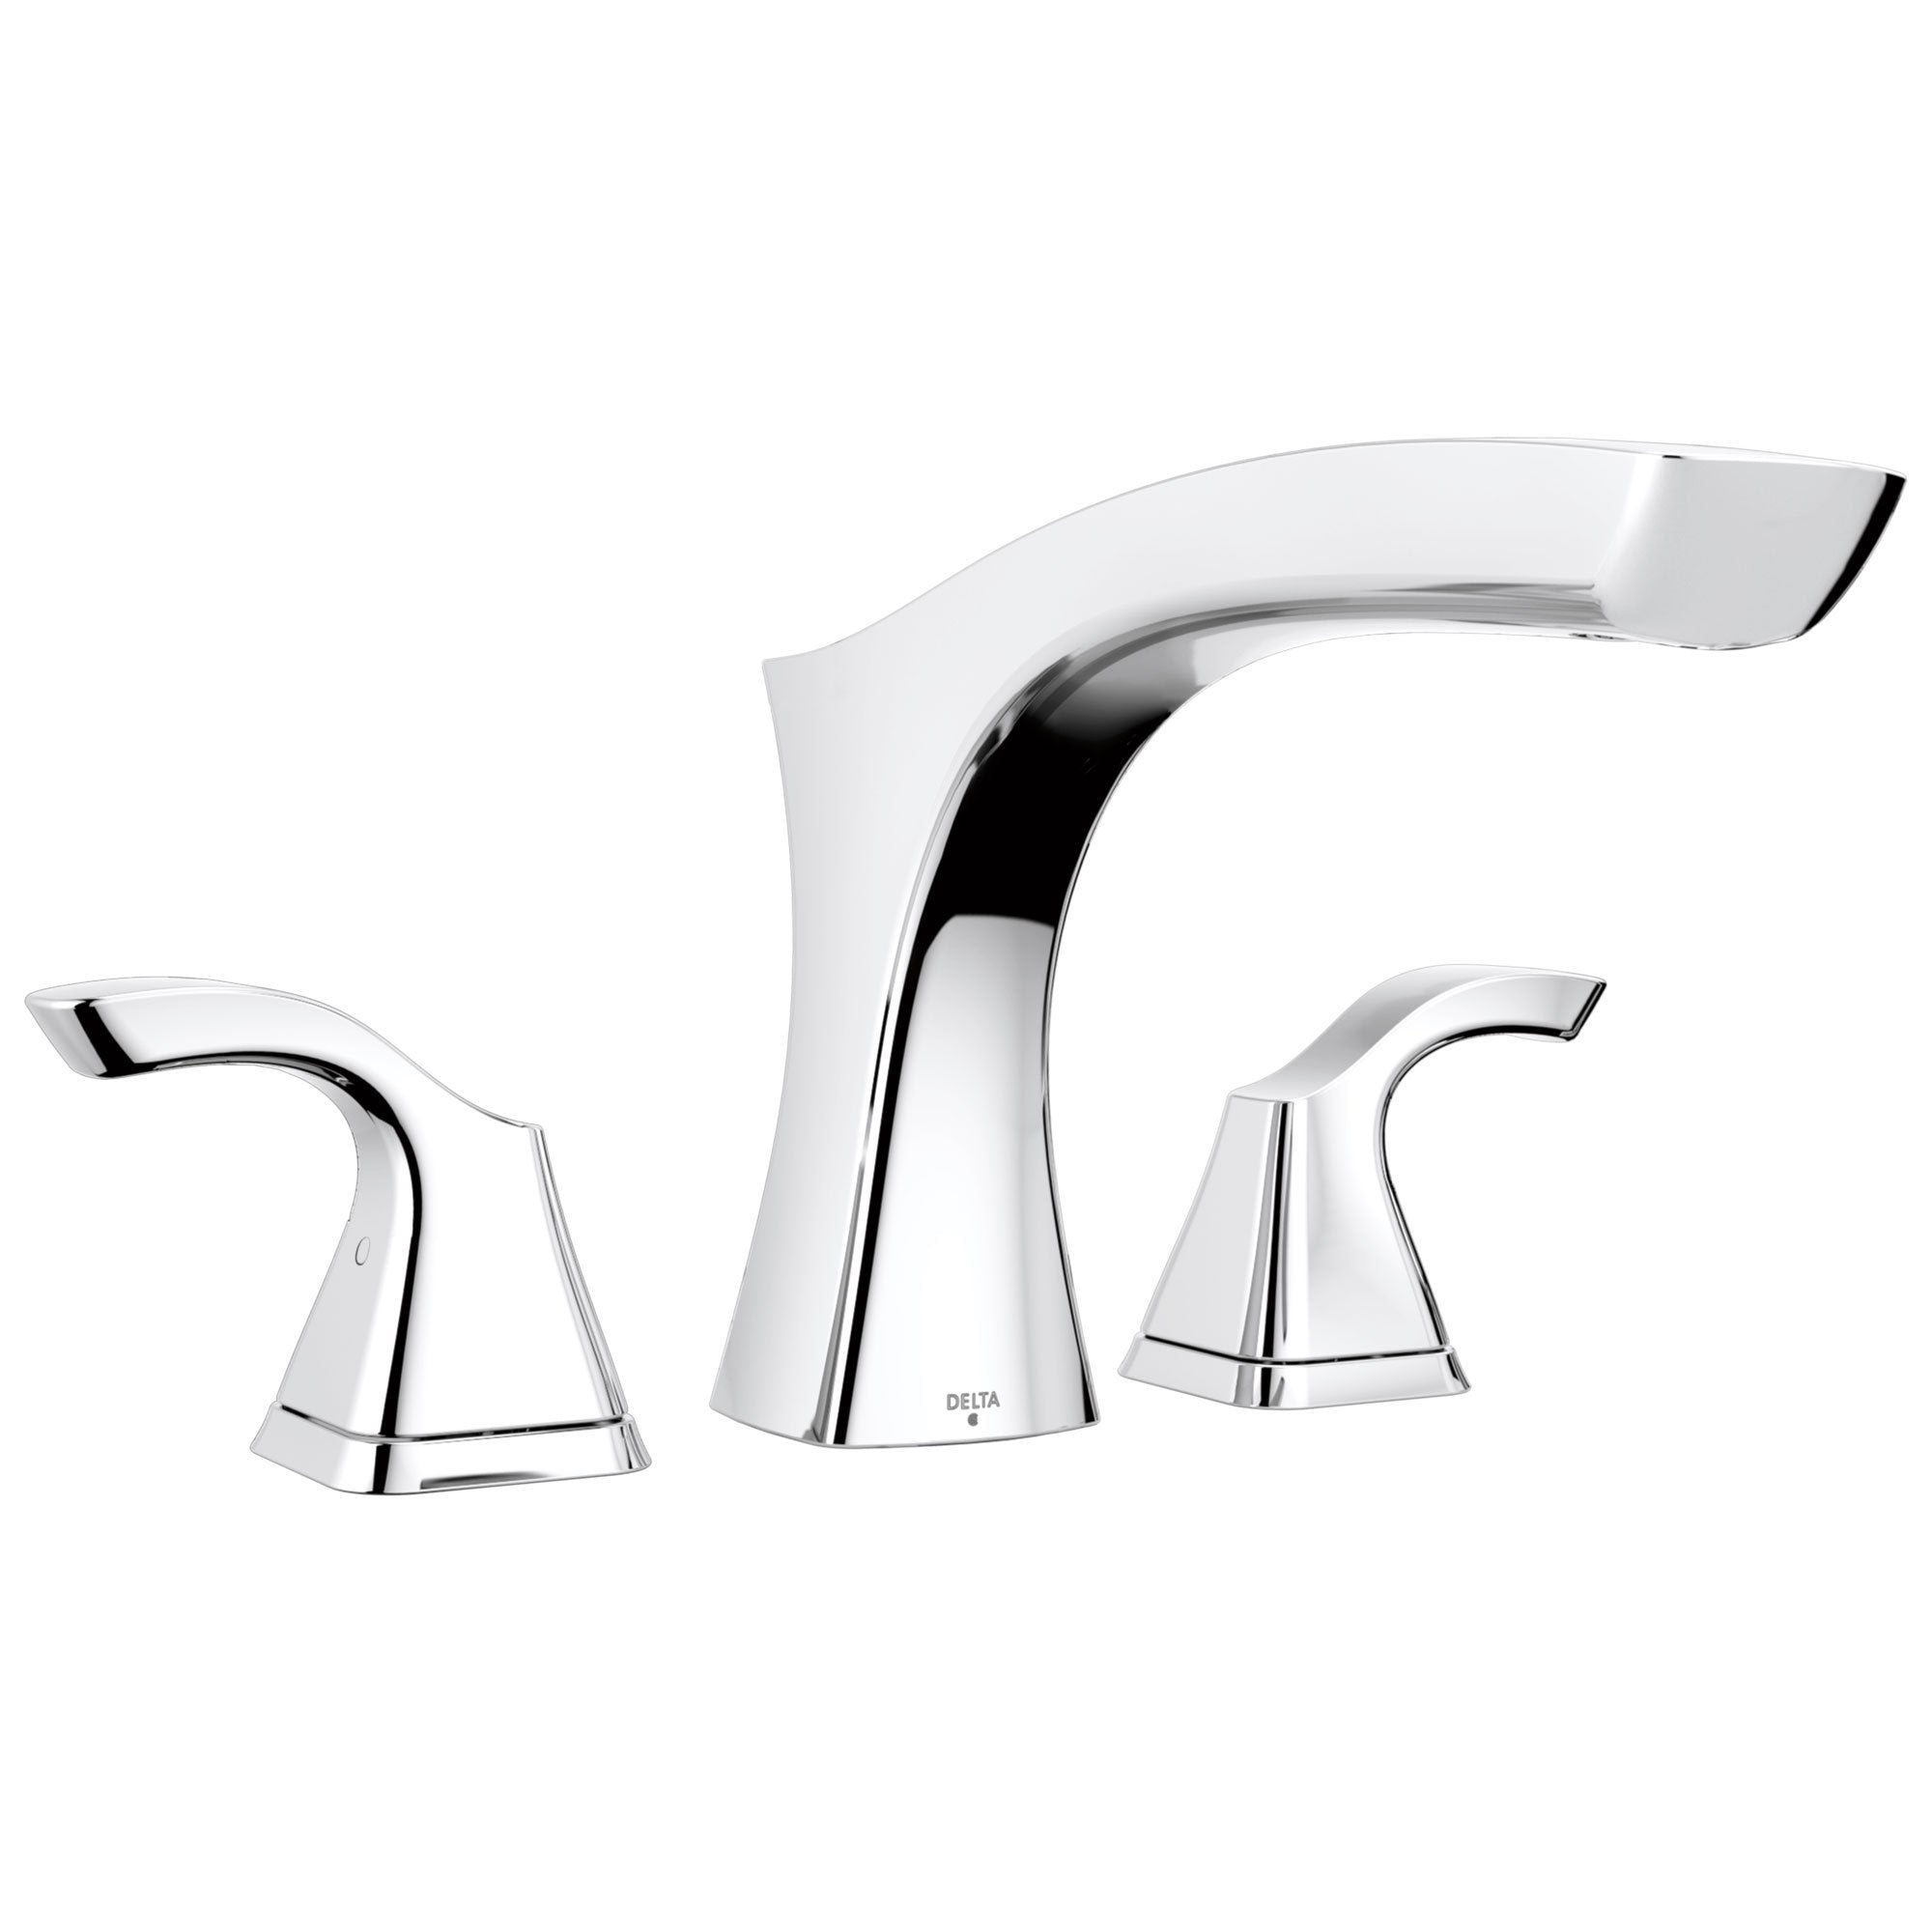 Delta Tesla Collection Chrome Finish Modern Widespread Roman Tub Filler Faucet Includes Trim Kit and Rough-in Valve D1919V